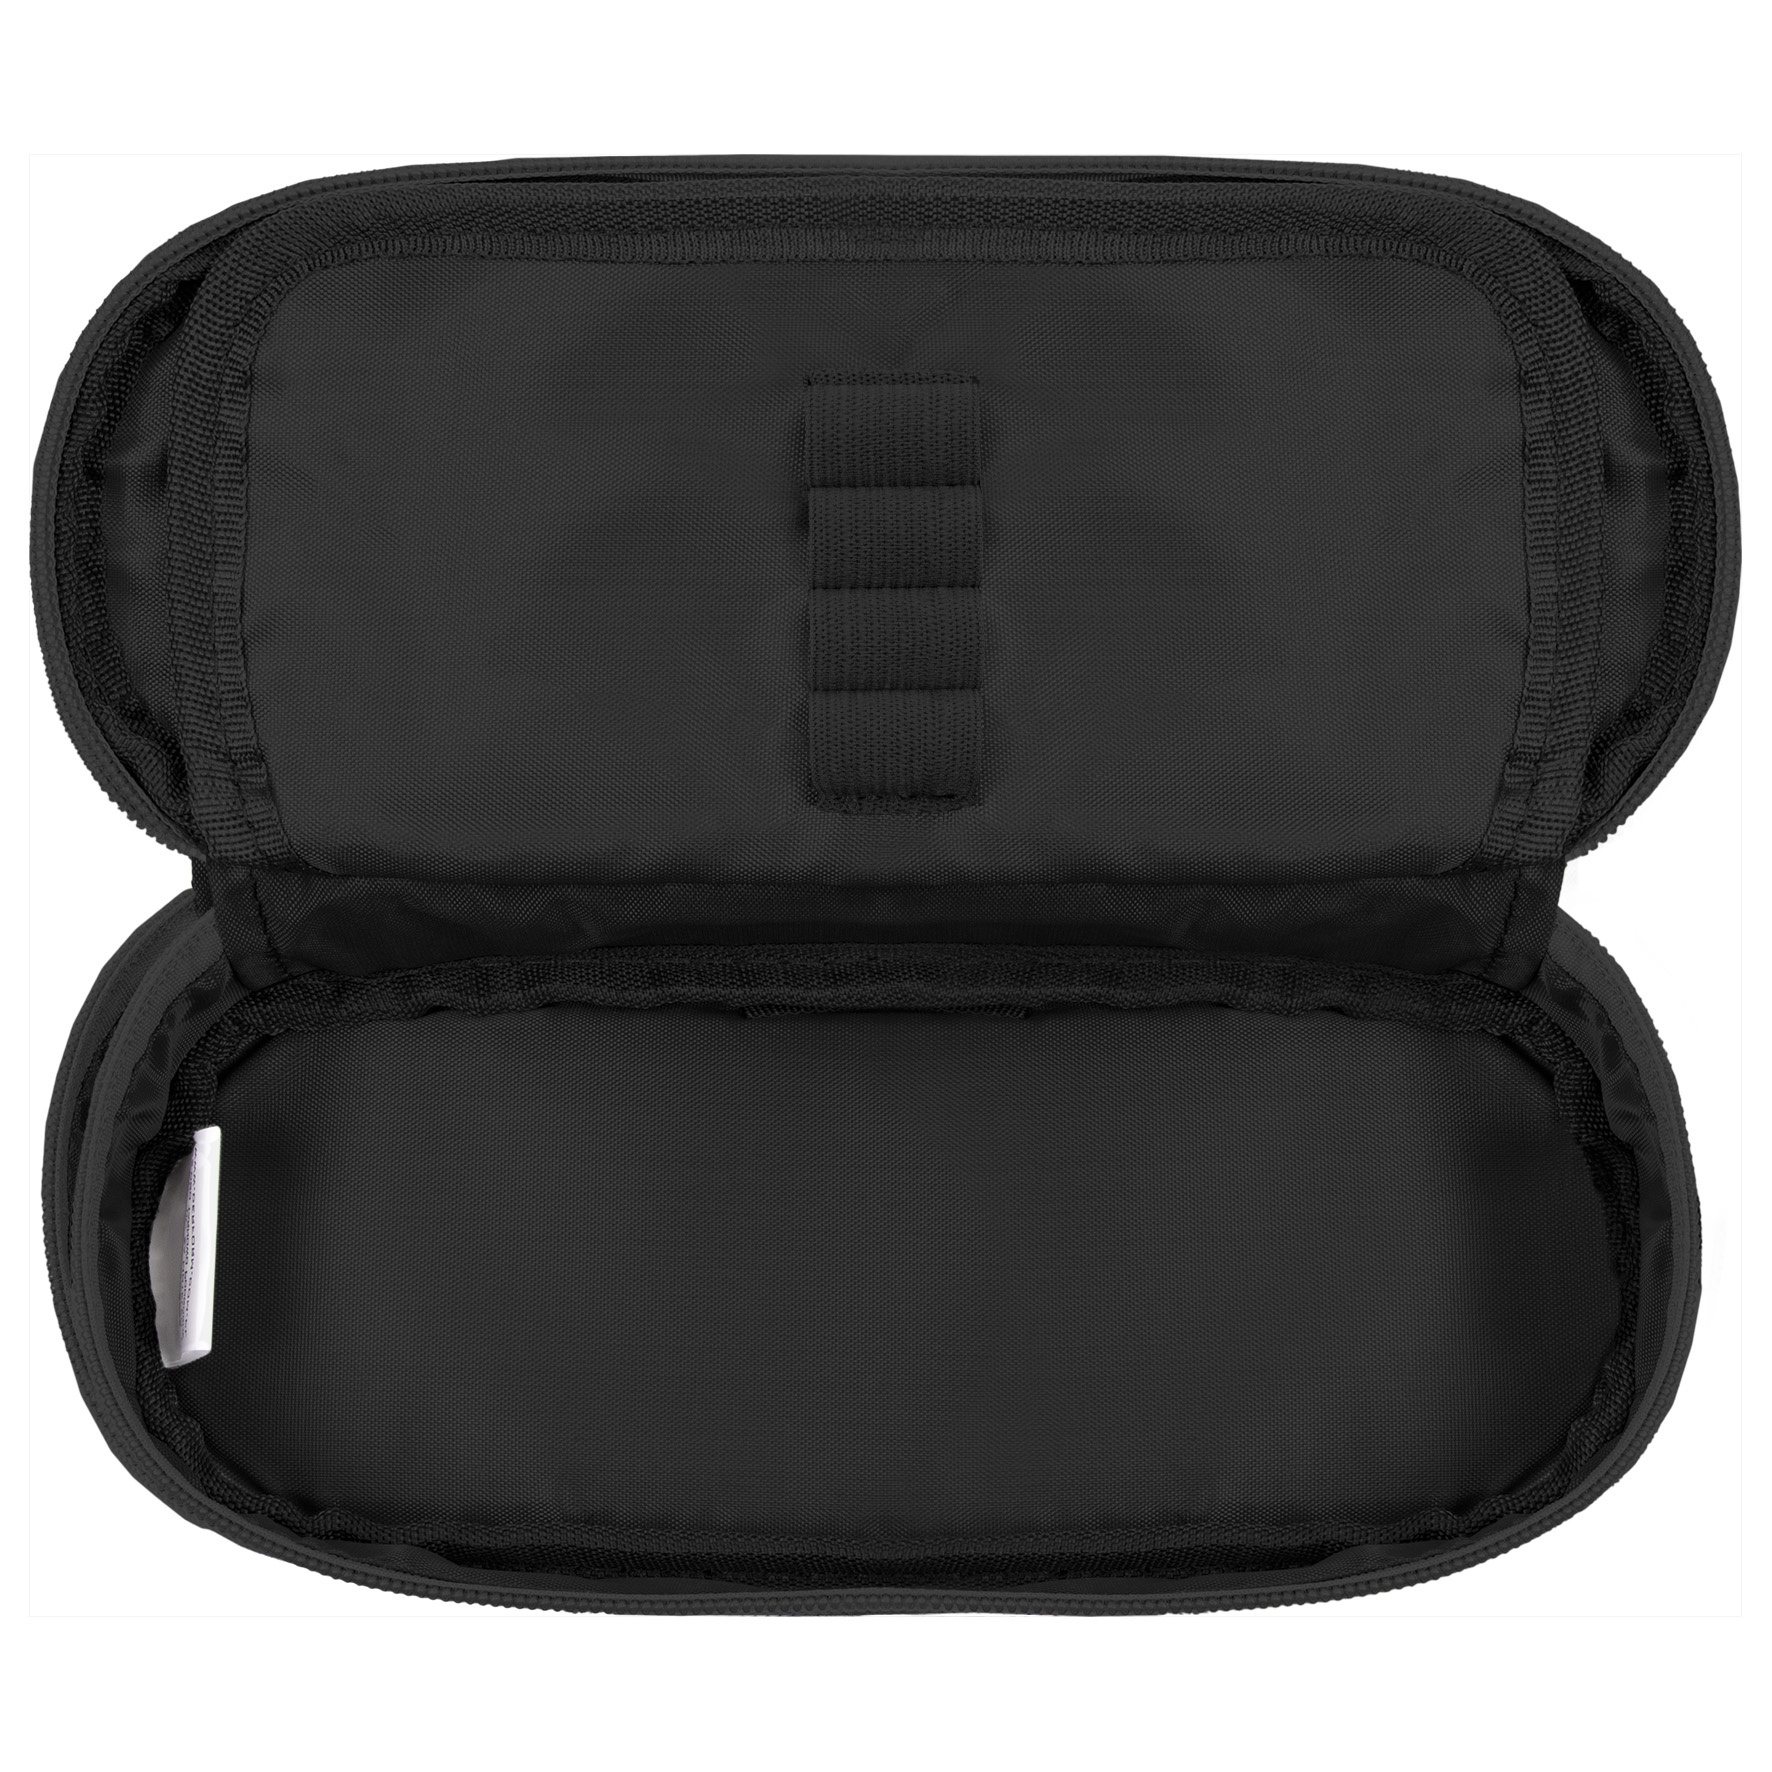 BackUP Pouch Game - 23 x 9 x 5 cm - Polyester